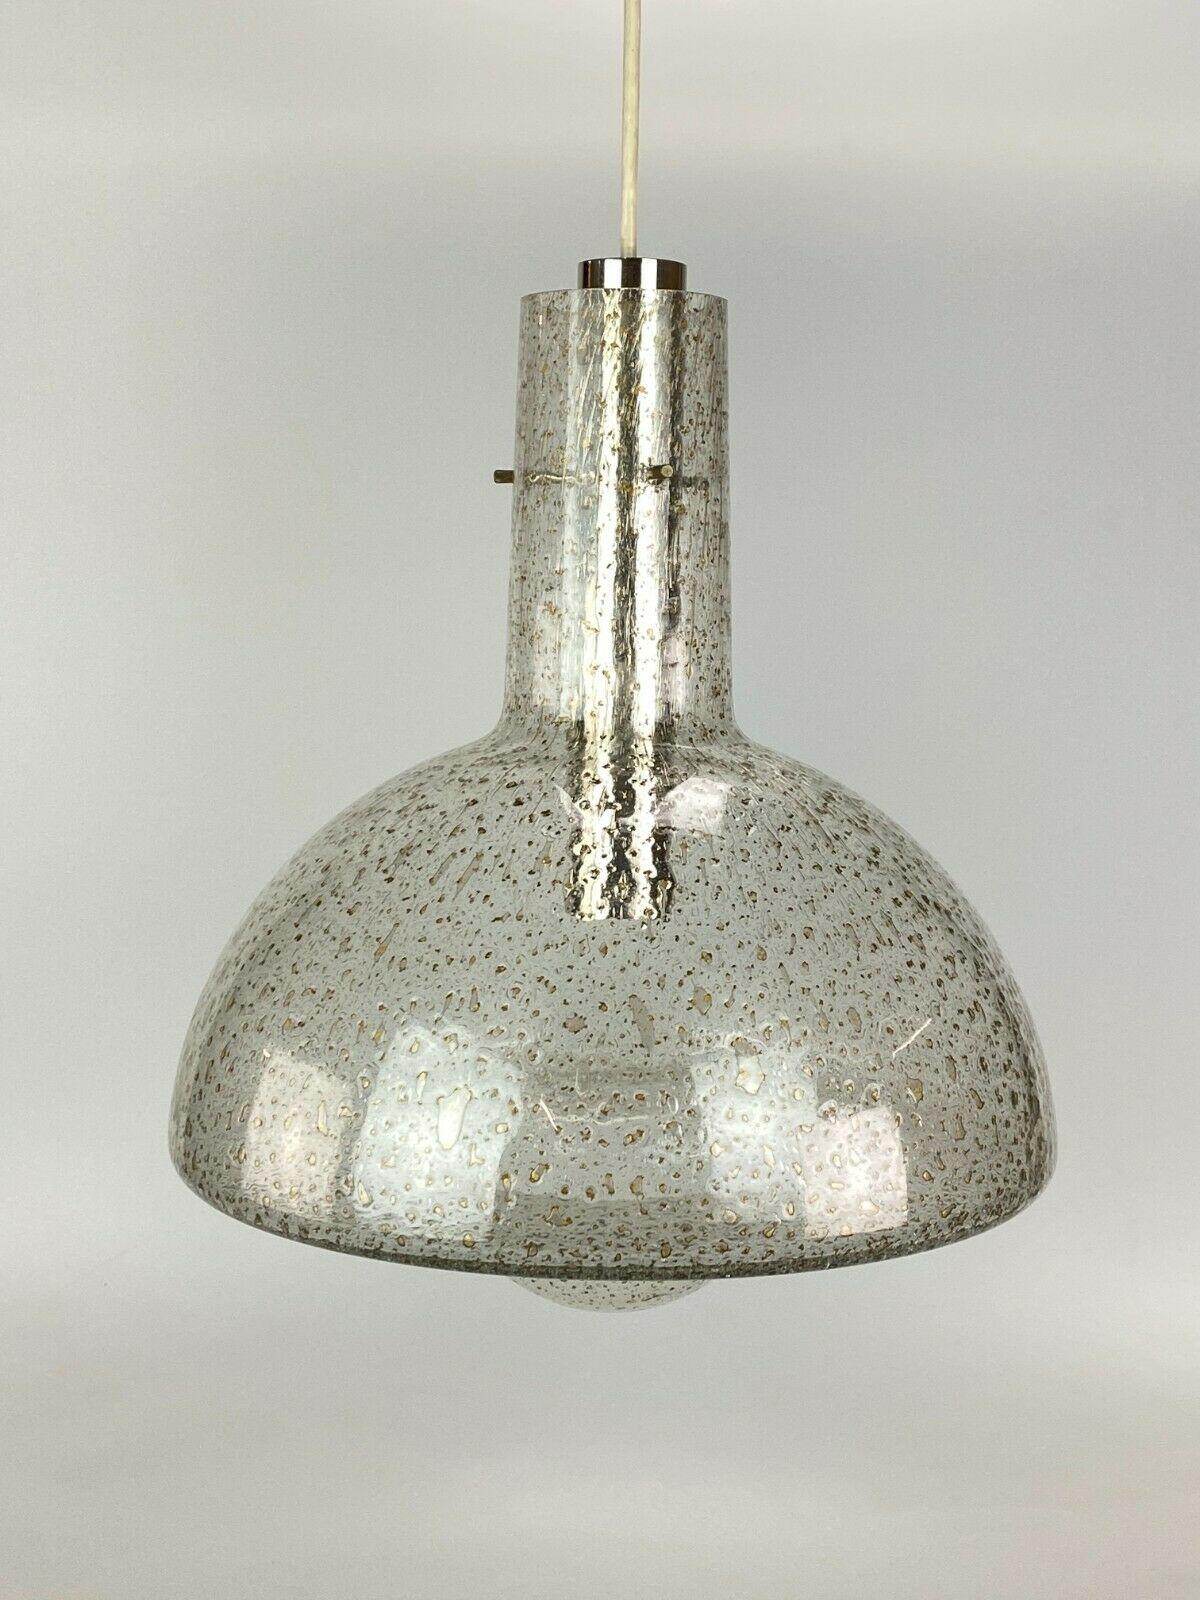 Swiss 60s 70s Lamp Light Ceiling Lamp Hanging Lamp Temde Glass Space Age Design For Sale